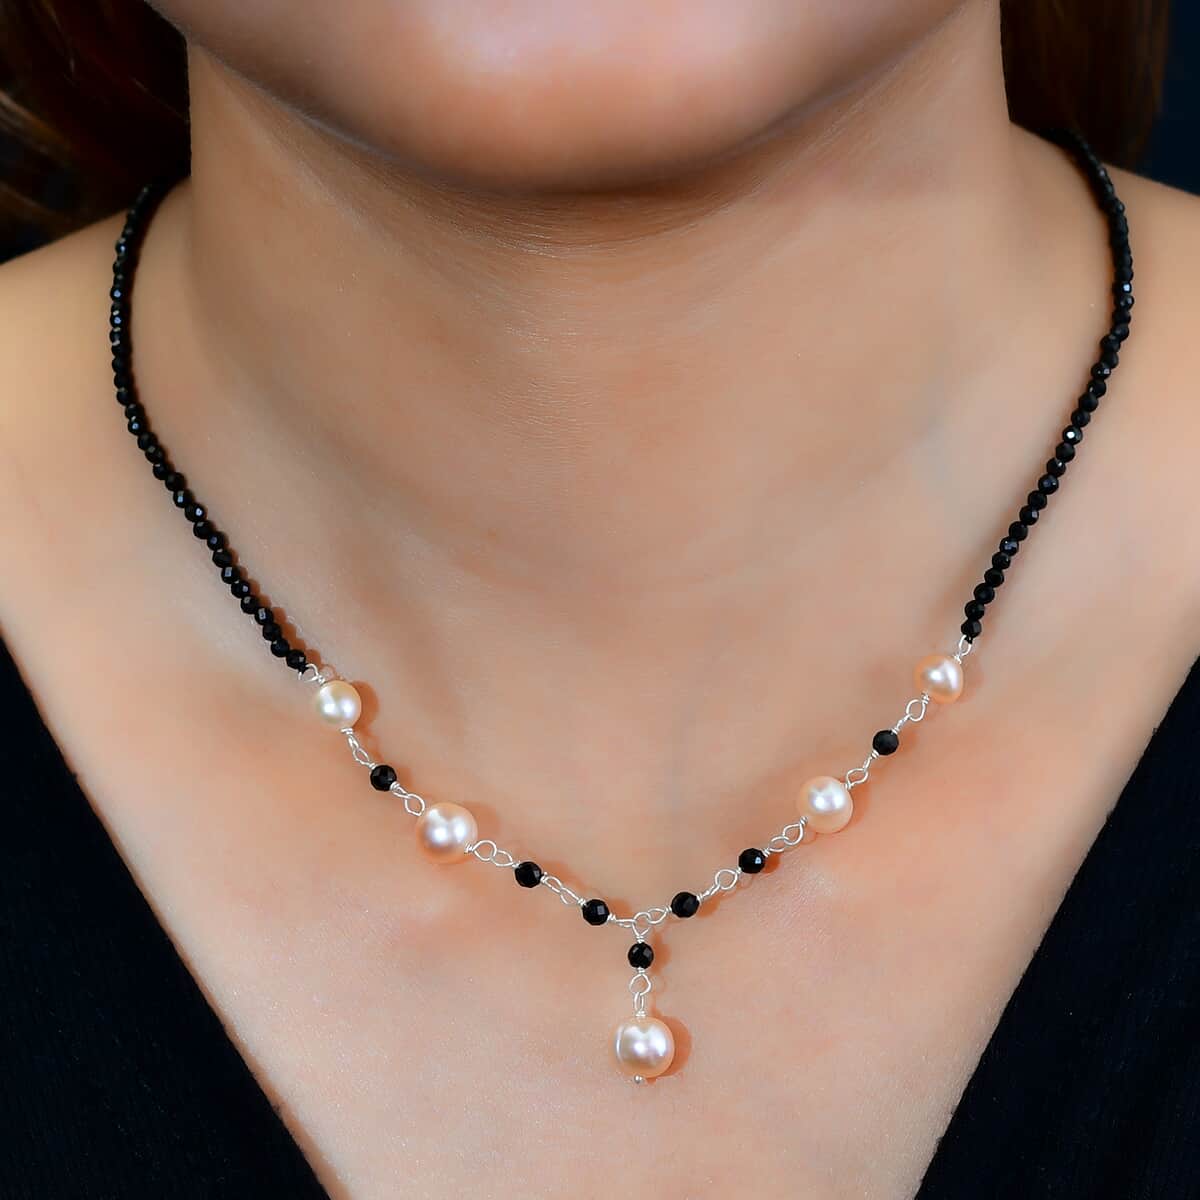 Buy Golden Freshwater Pearl and Thai Black Spinel Necklace 20 Inches in  Sterling Silver 15.00 ctw at ShopLC.